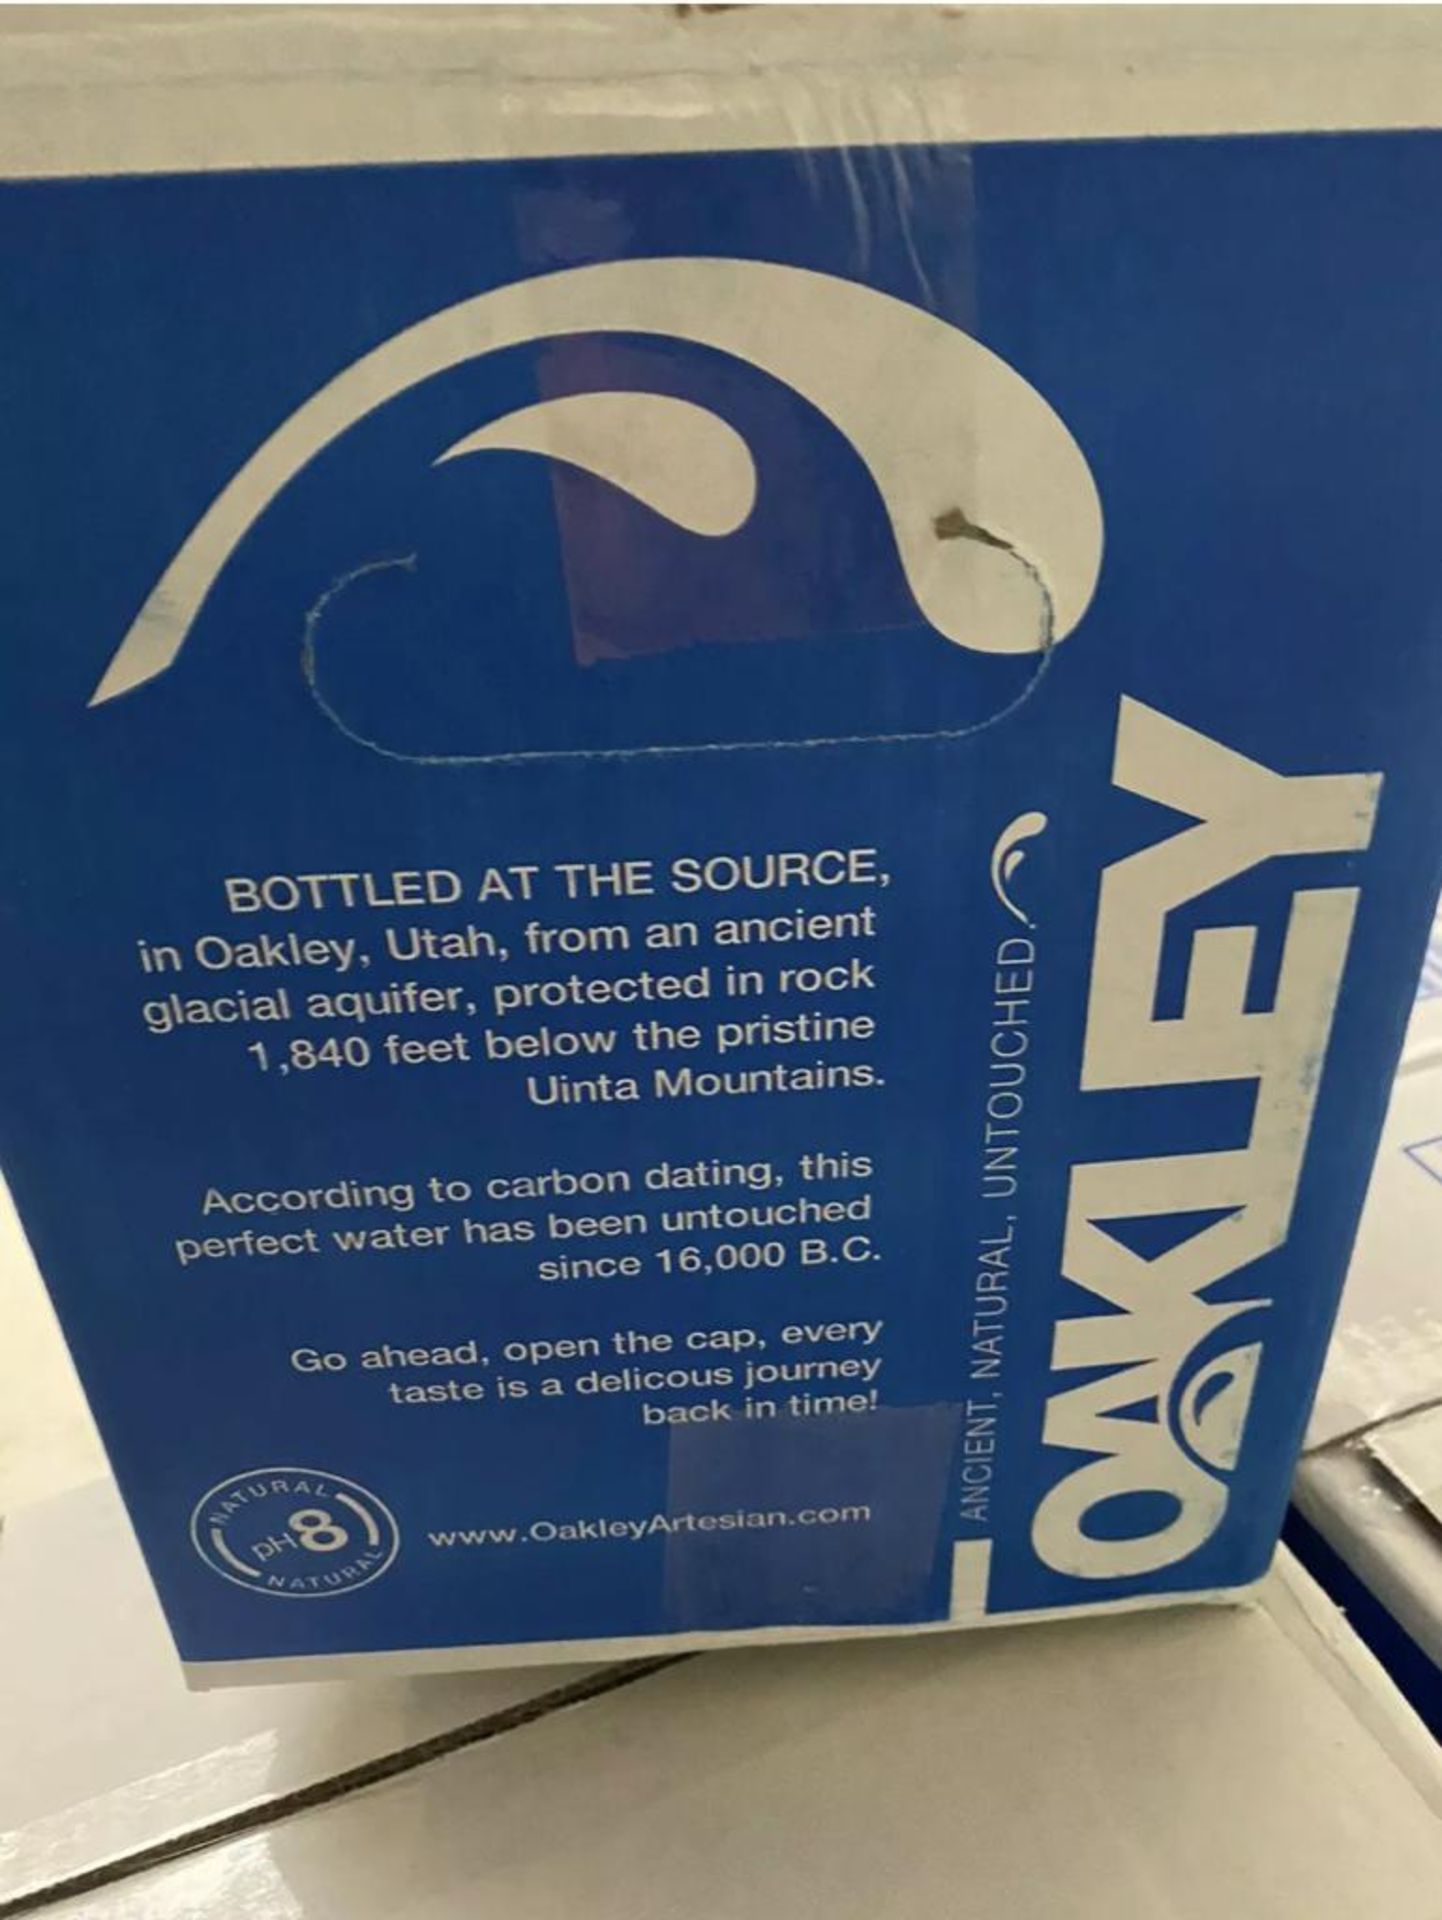 50 x Boxes of Oakley Artisan Water - Best Before Dec 2021 - 12 Packs in Each Box - Includes 600 - Image 4 of 8